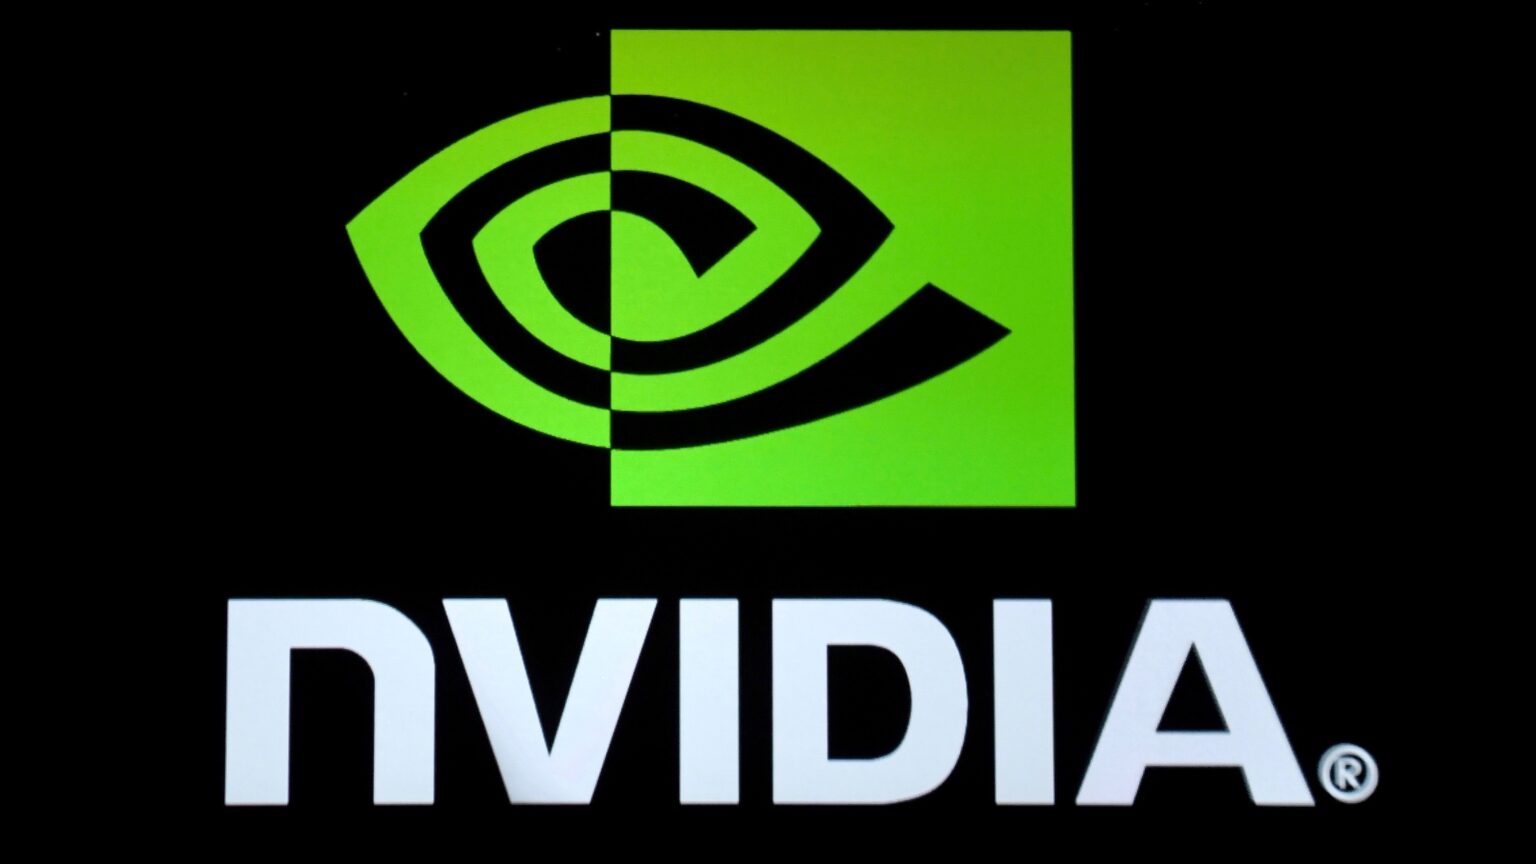 What Is Nvidia Stock And What Is Its Performance? – Konnek T